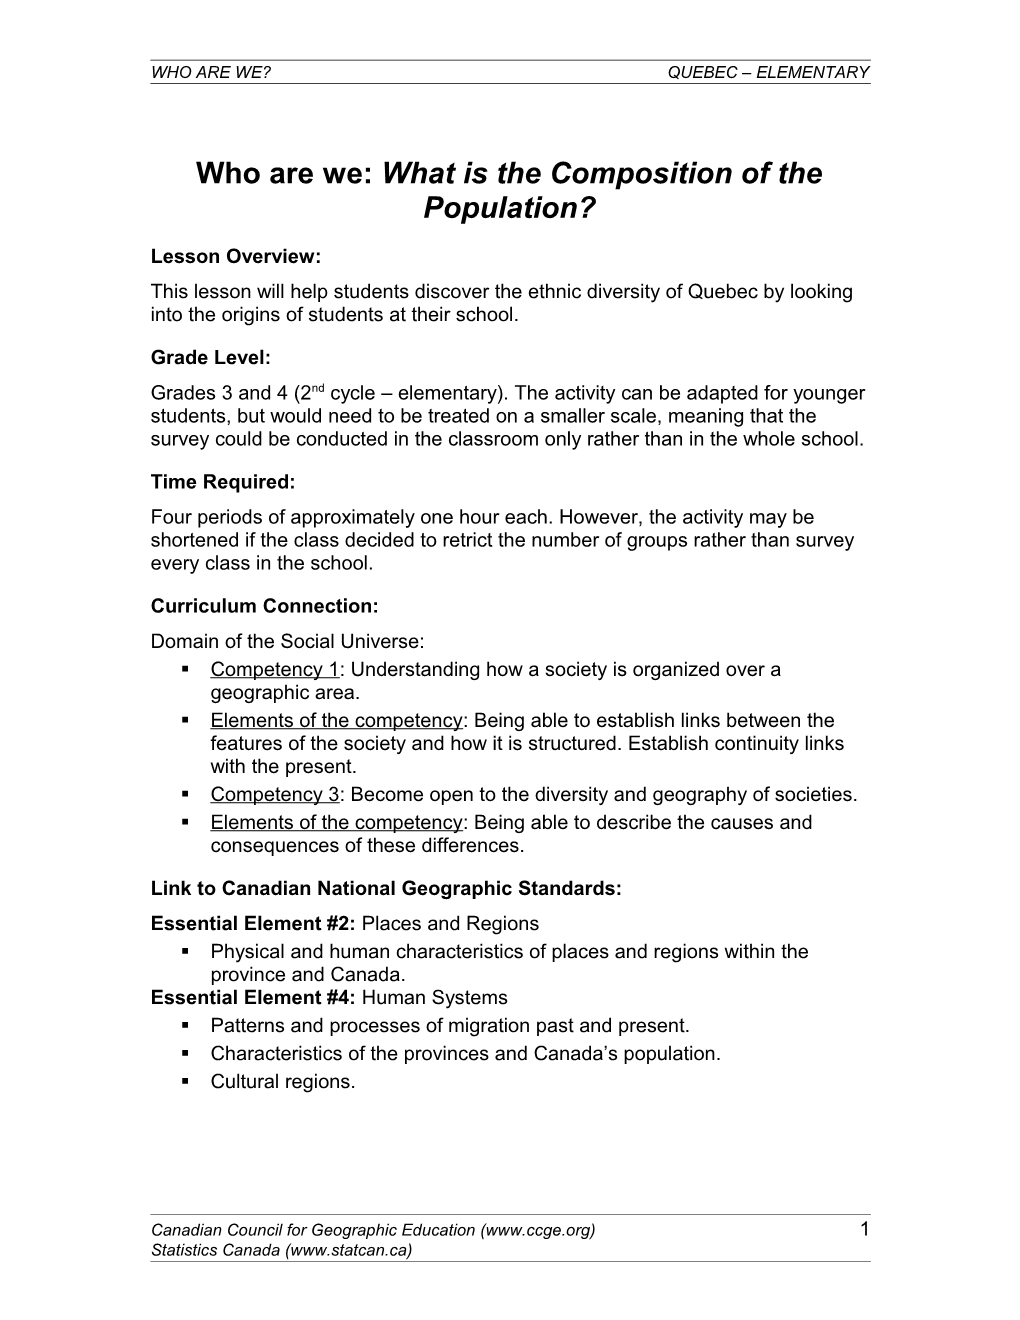 Who Are We: What Is the Composition of the Population?